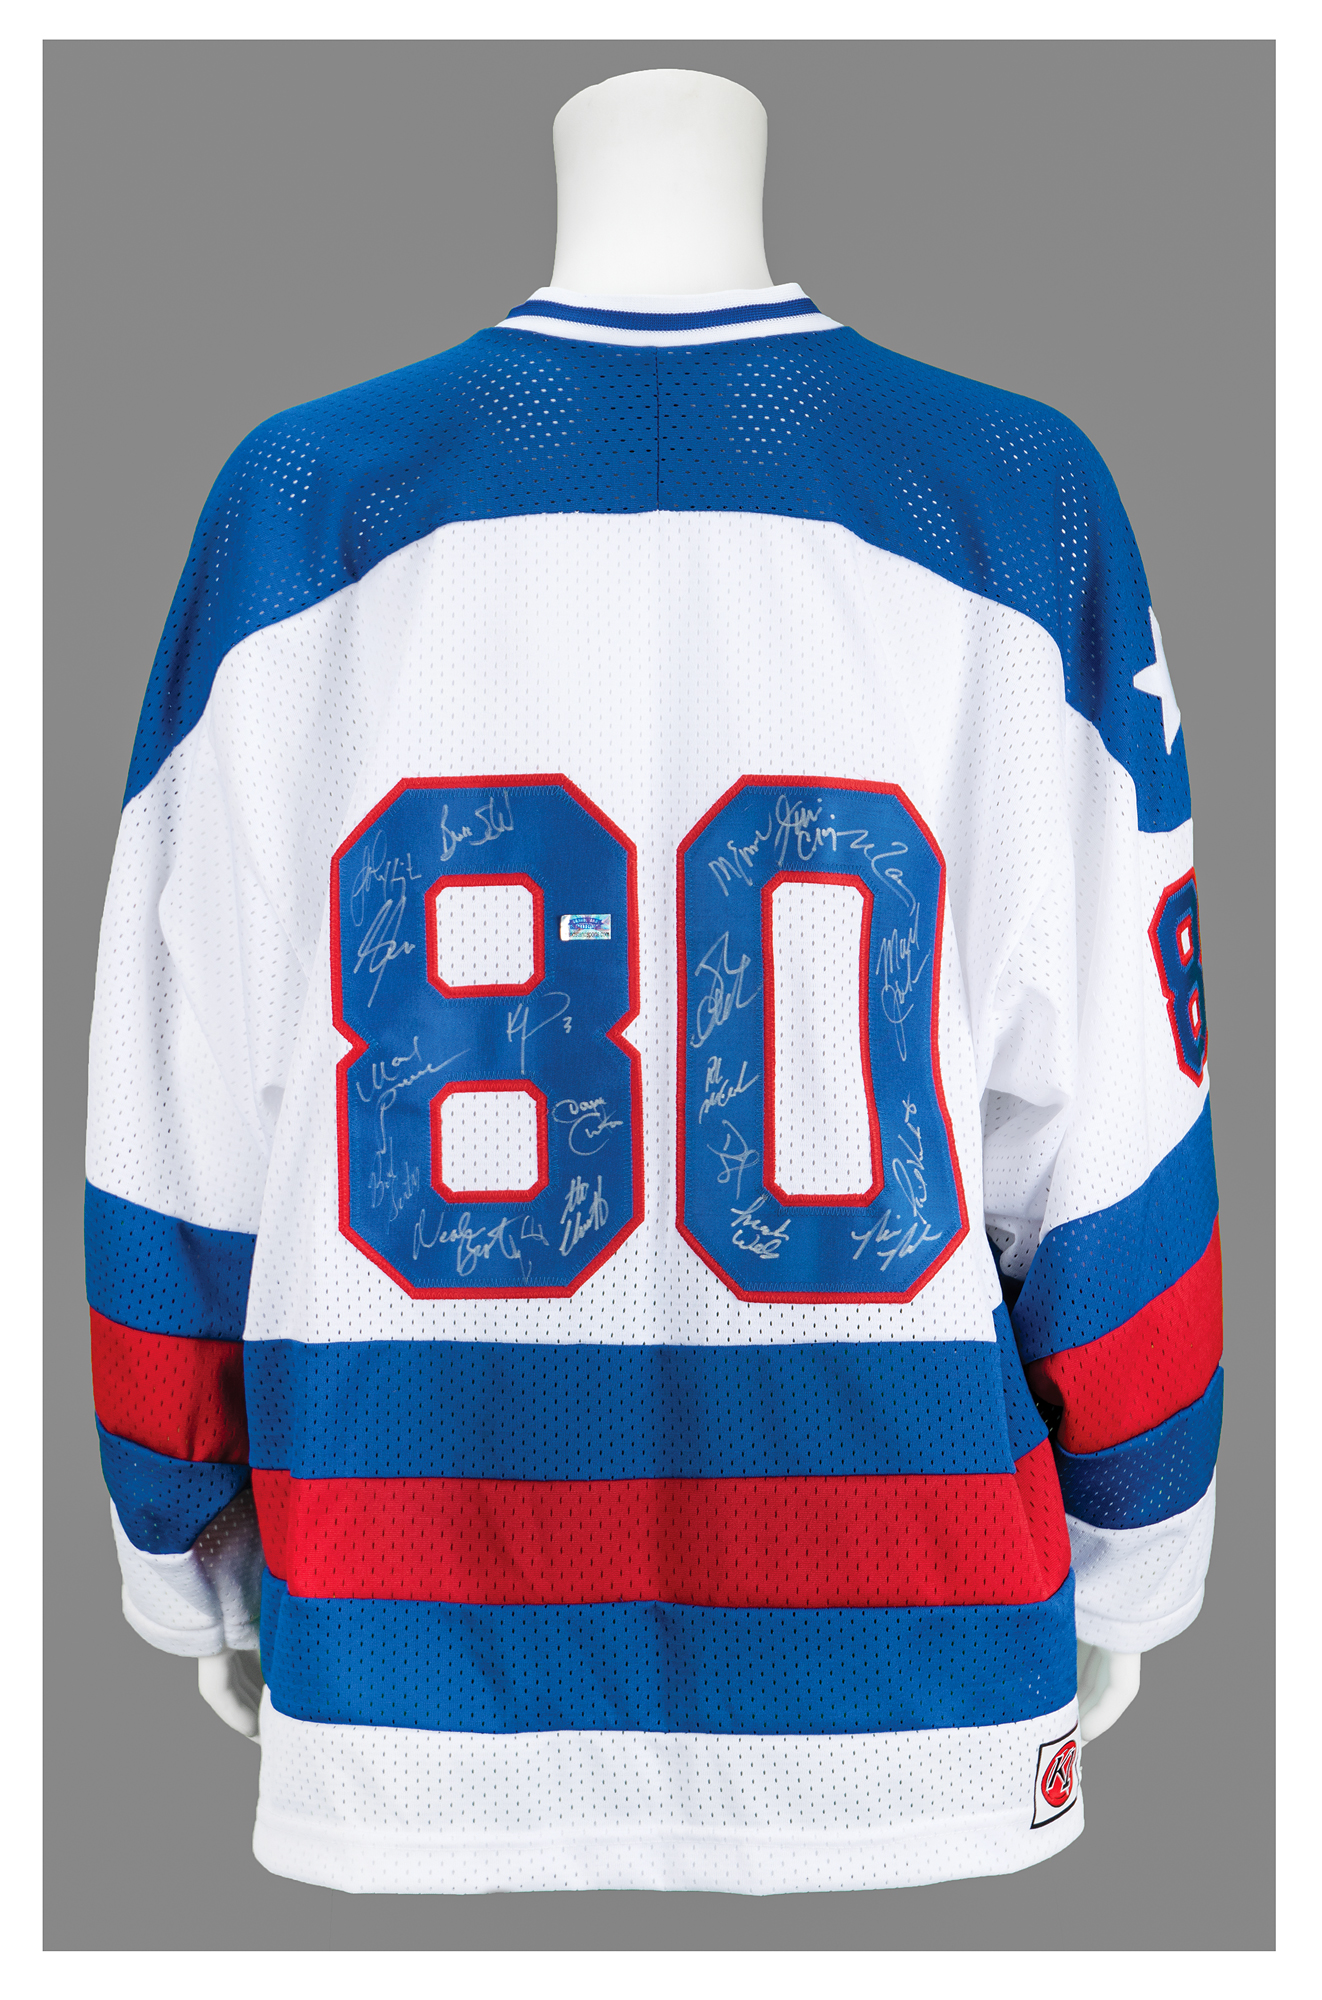 Lot #1032 Miracle on Ice Signed Jersey